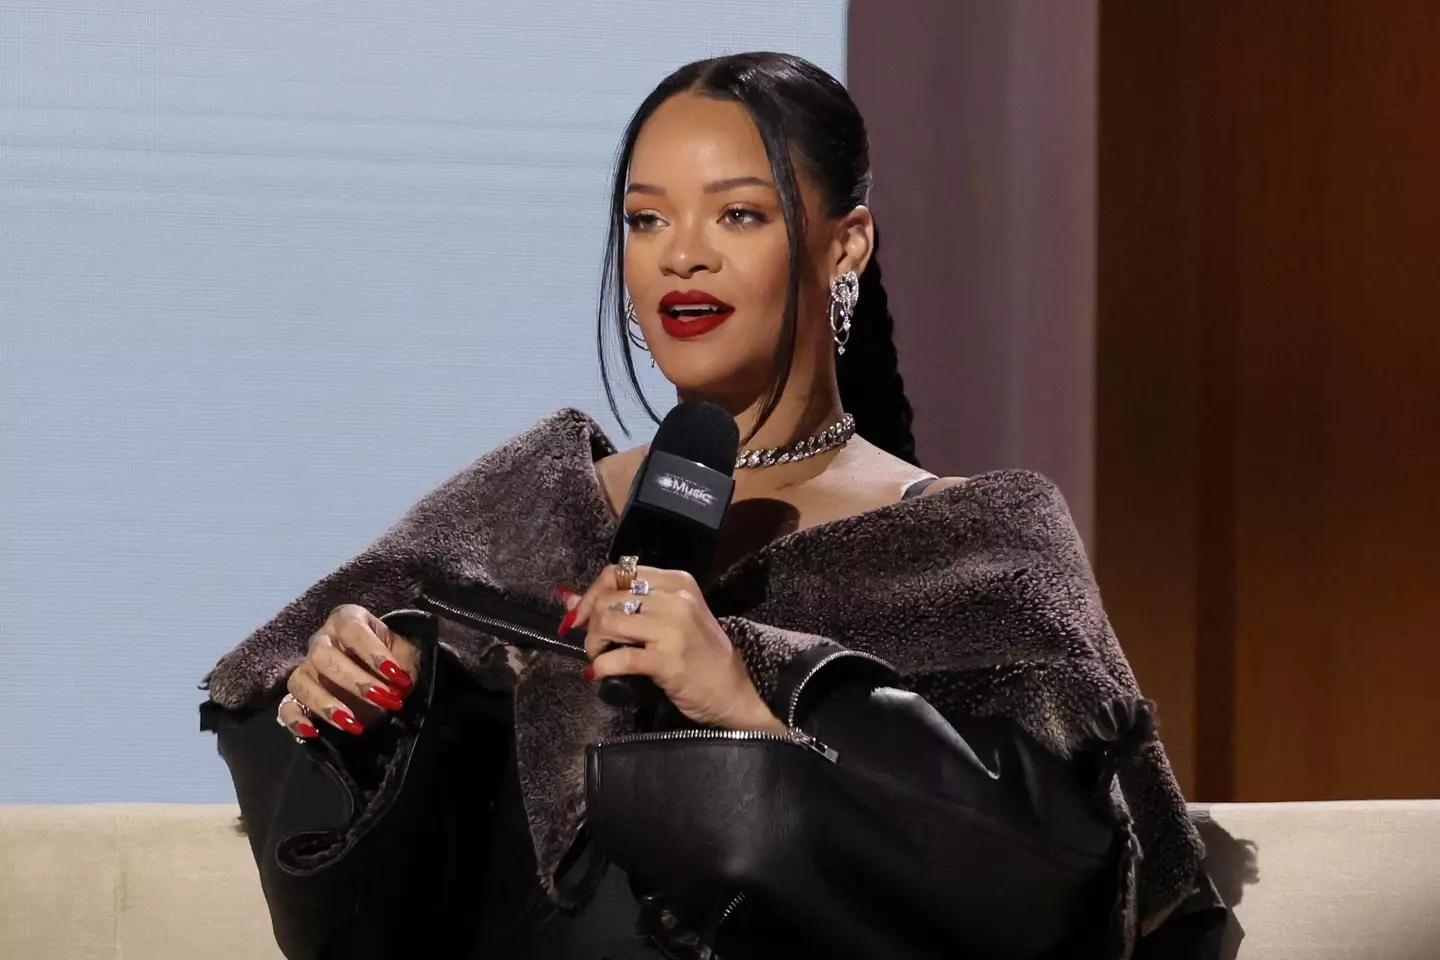 Rihanna is headlining the half-time show at this year's Super Bowl.